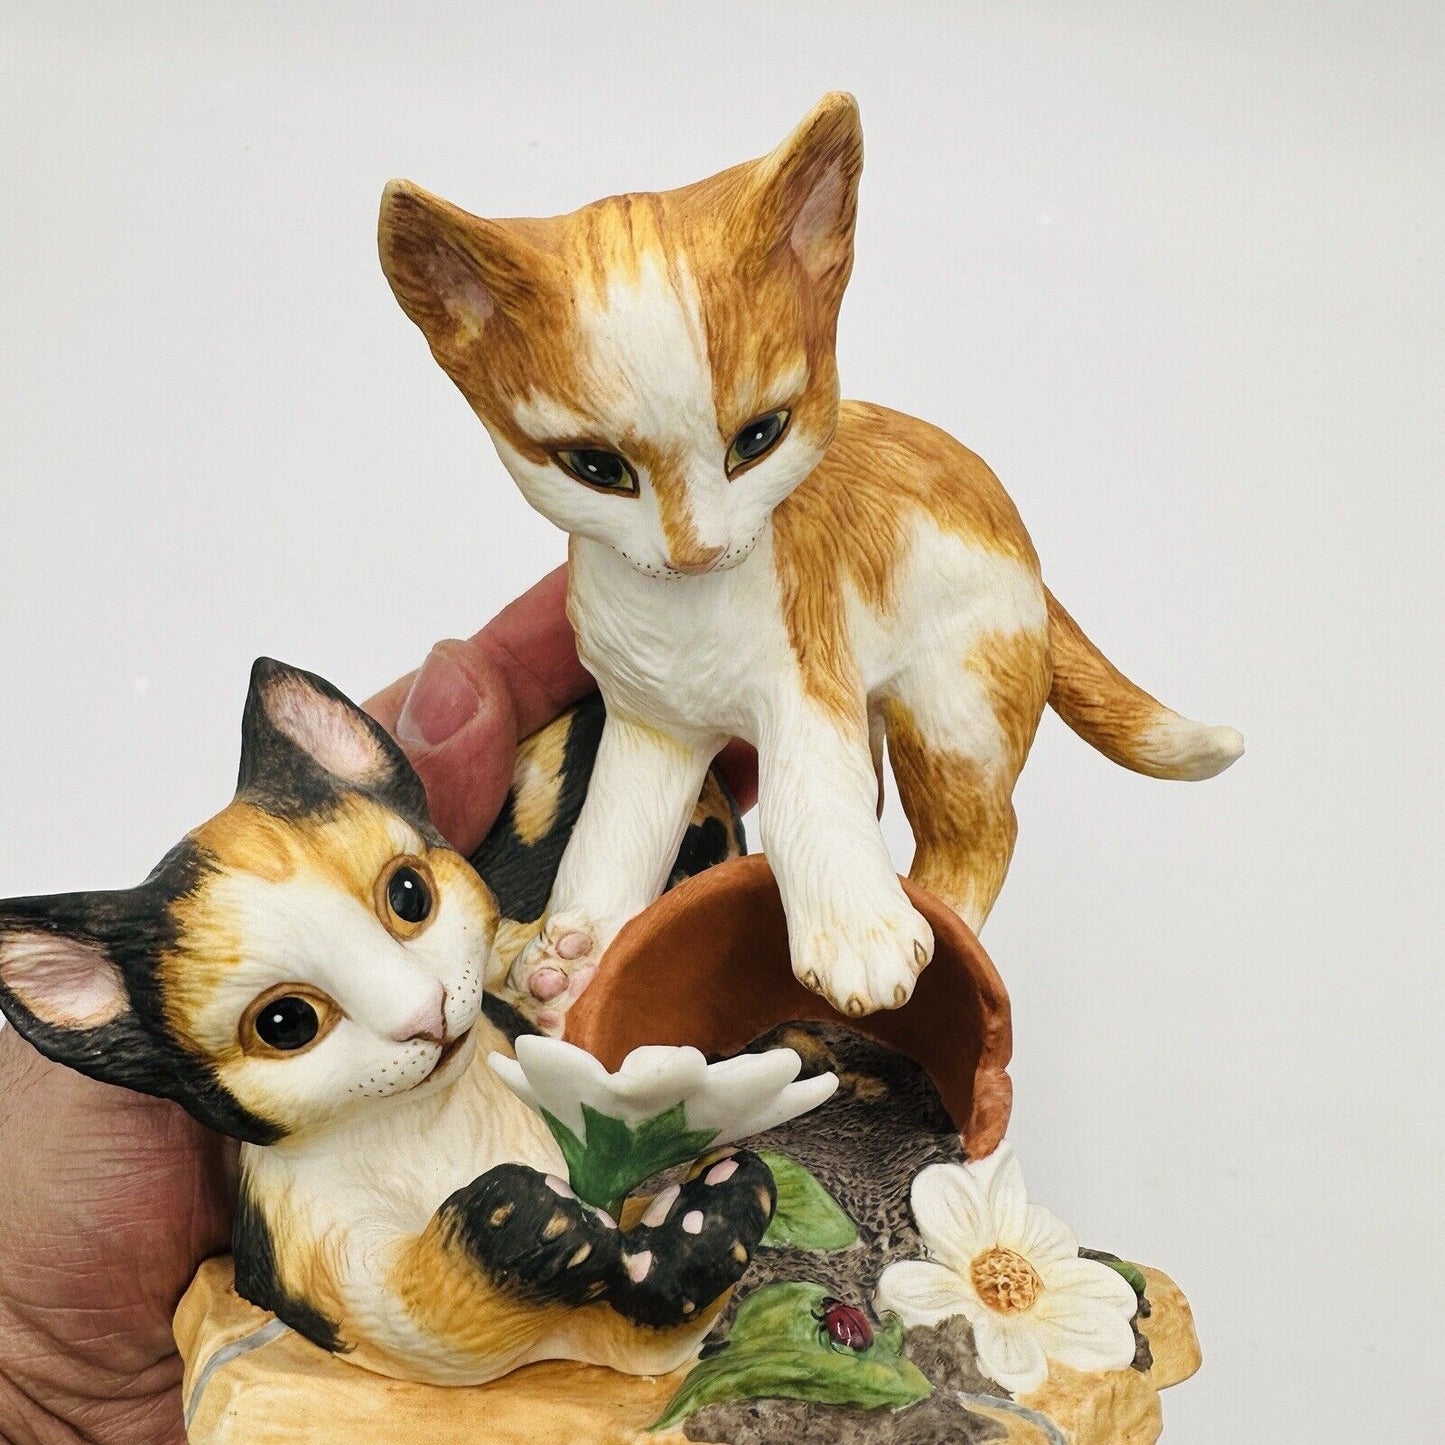 The Franklin Mint Shenenigans' Porcelain Bisque Kittens Playing In Pot Figurine